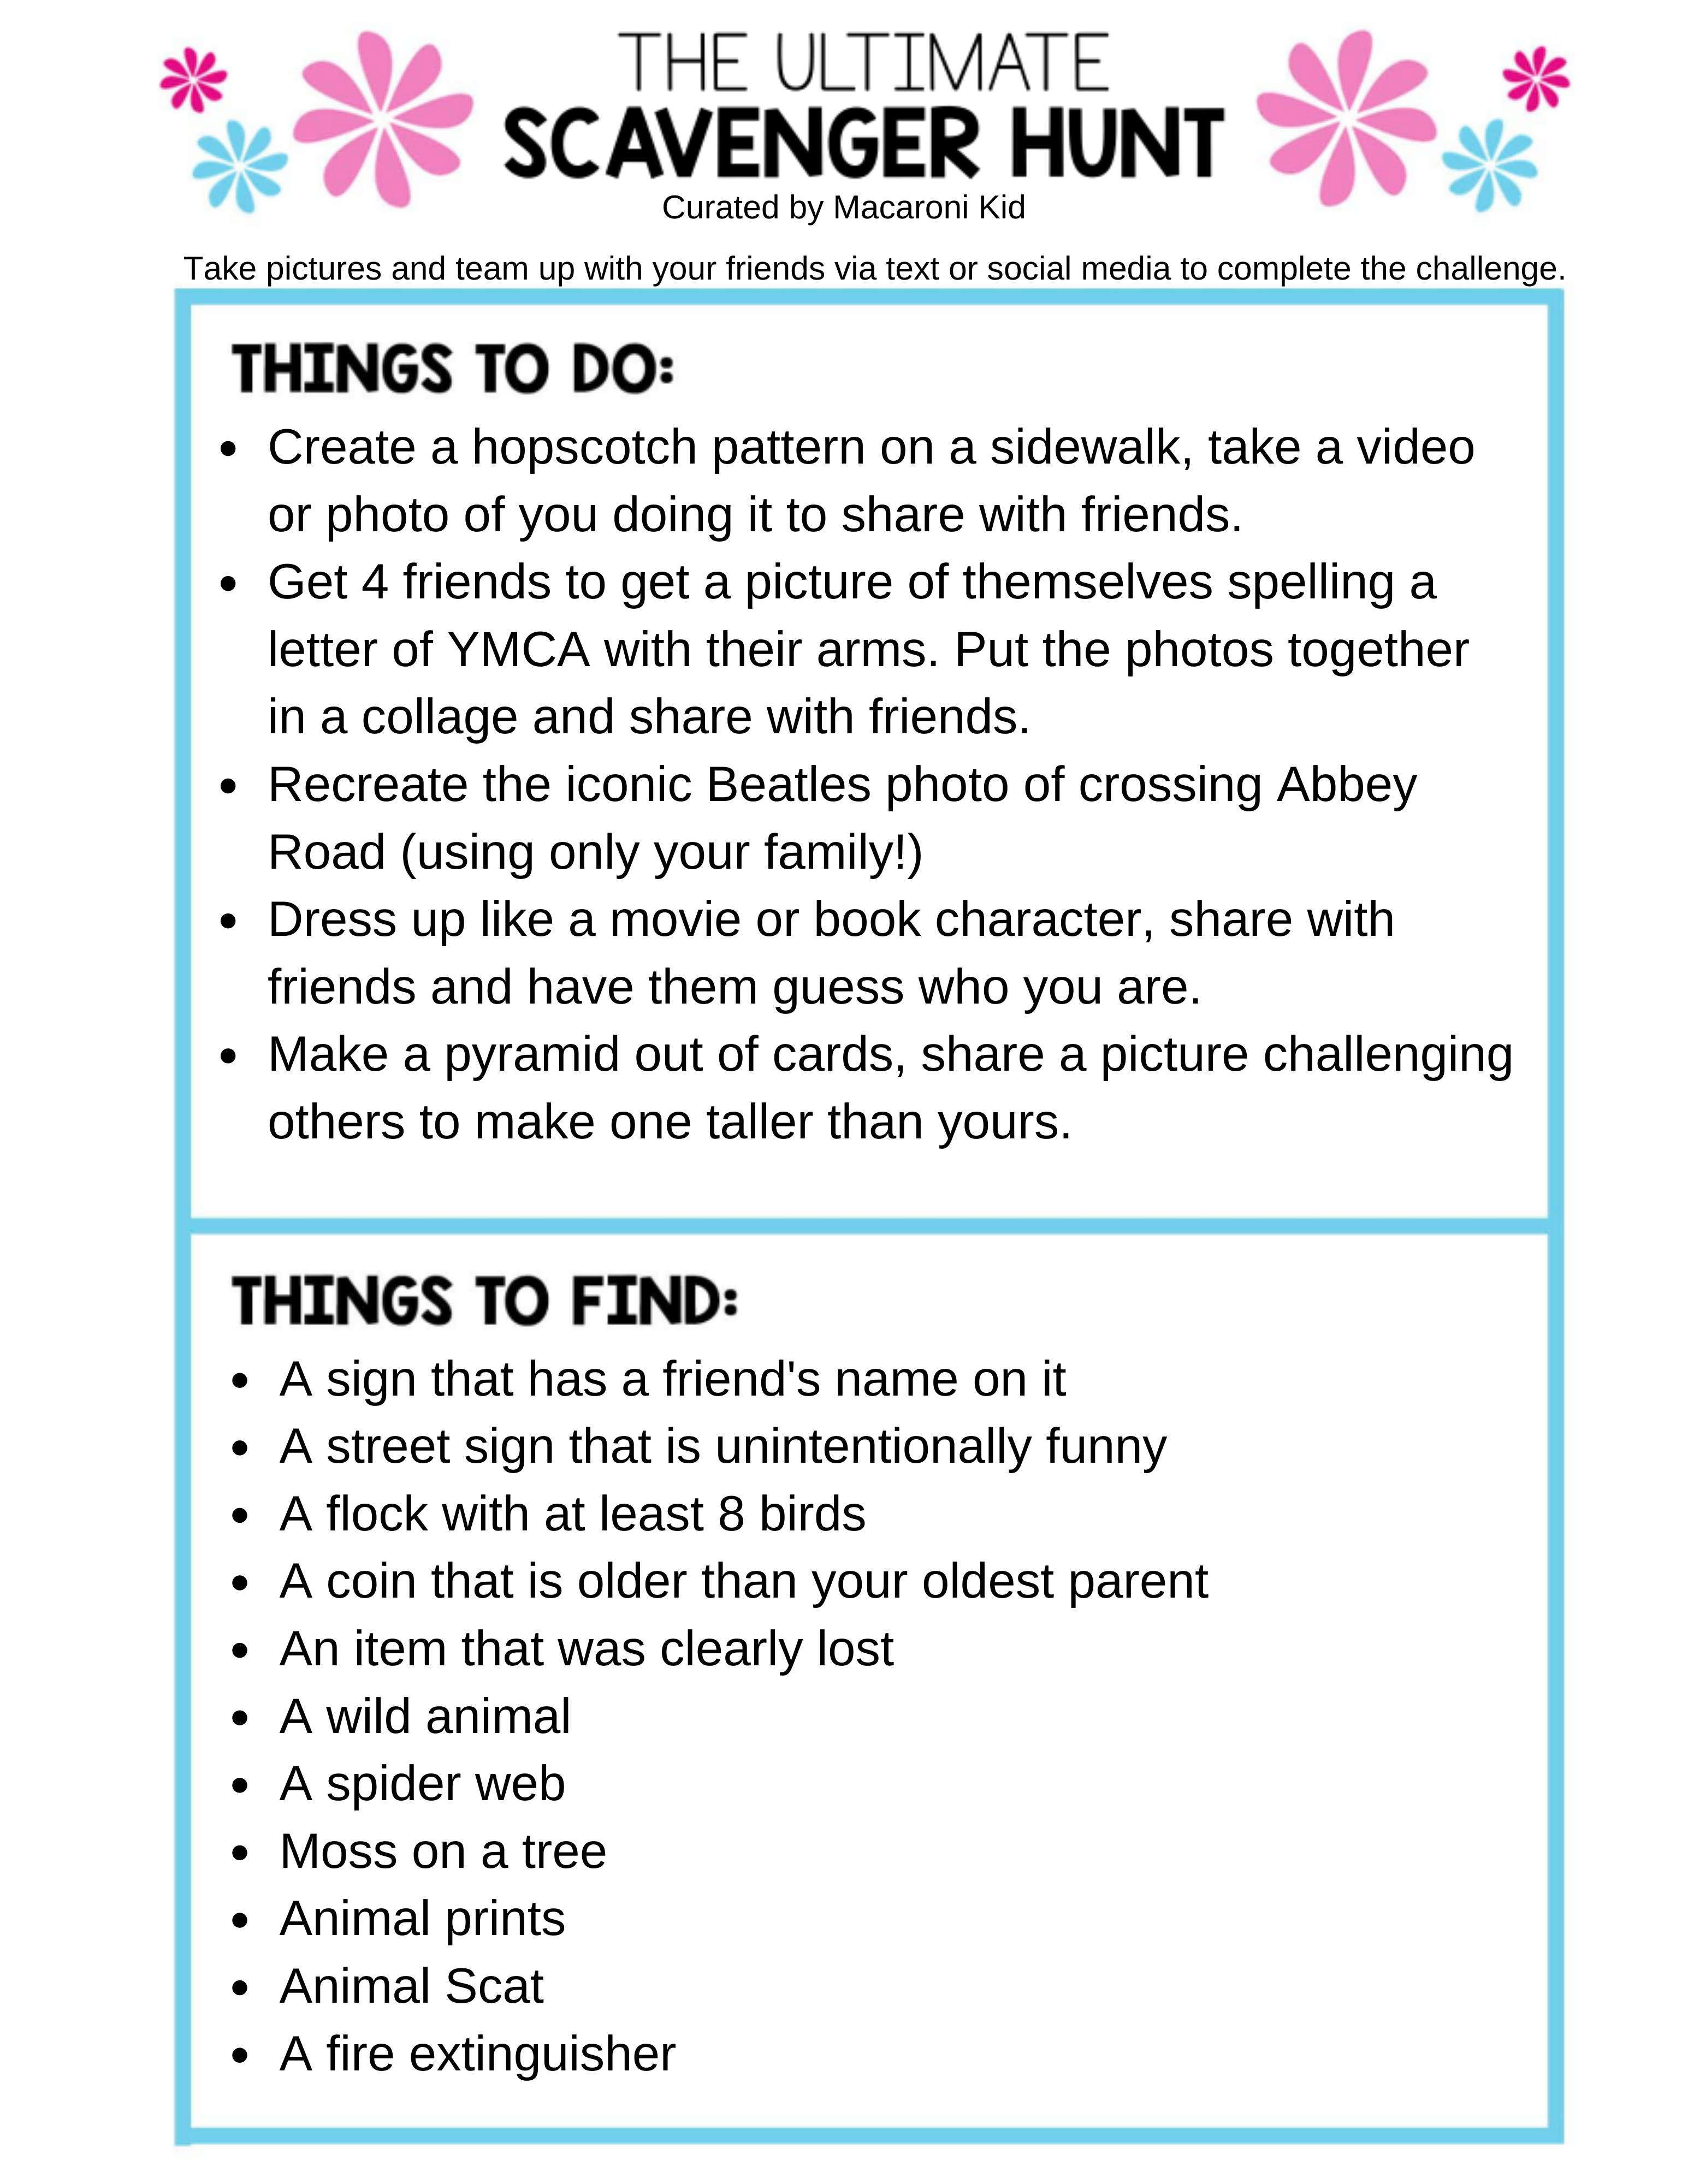 Team Building Scavenger Hunt Ideas For Adults